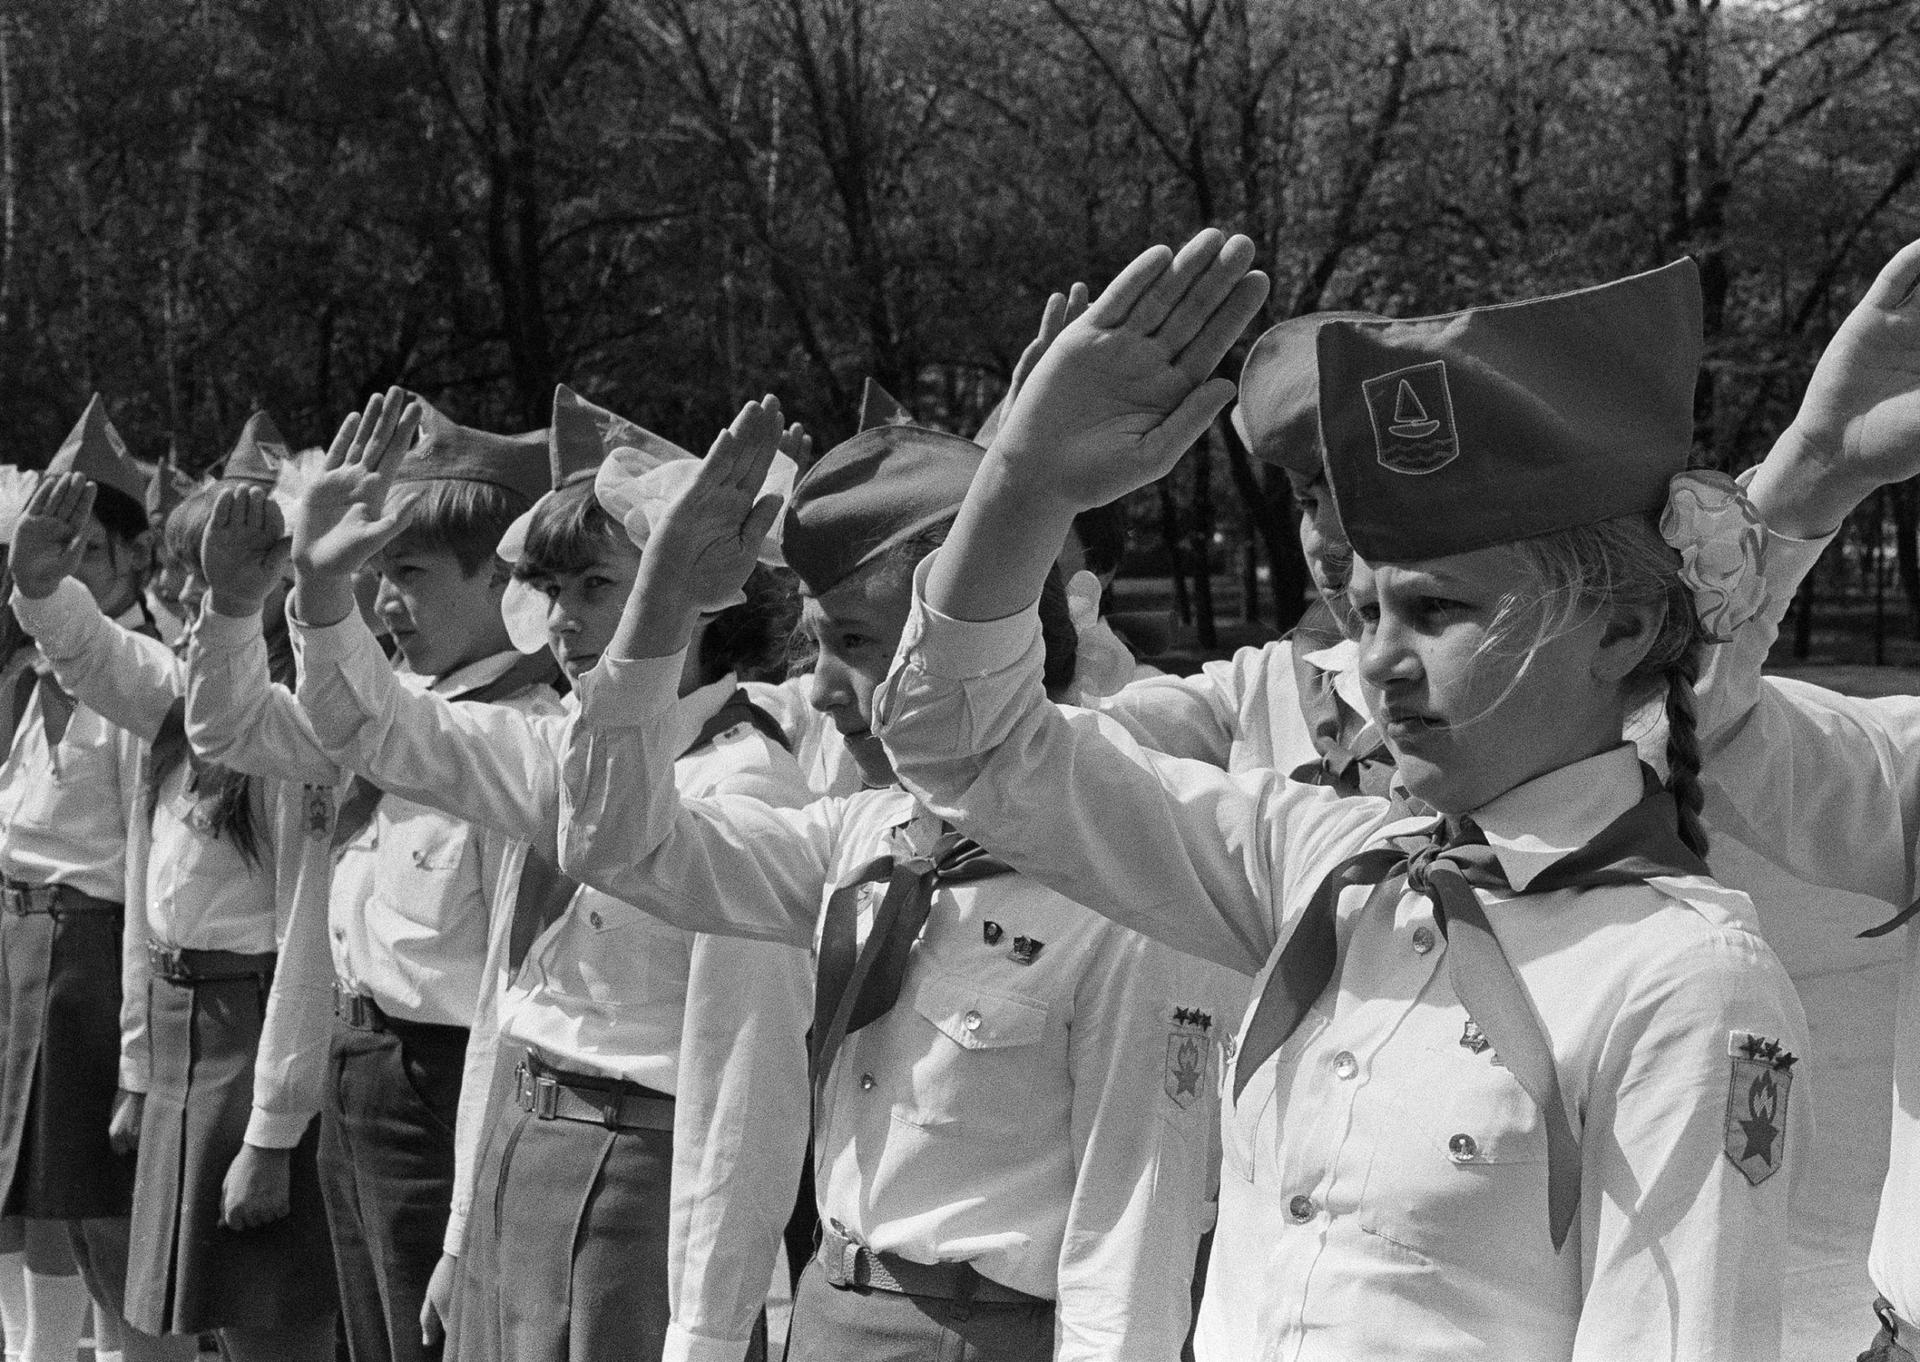 Members of the Pioneers, a Communist youth organization, give the Pioneer salute at ceremonies marking the organization's anniversary, May 19, 1981. 